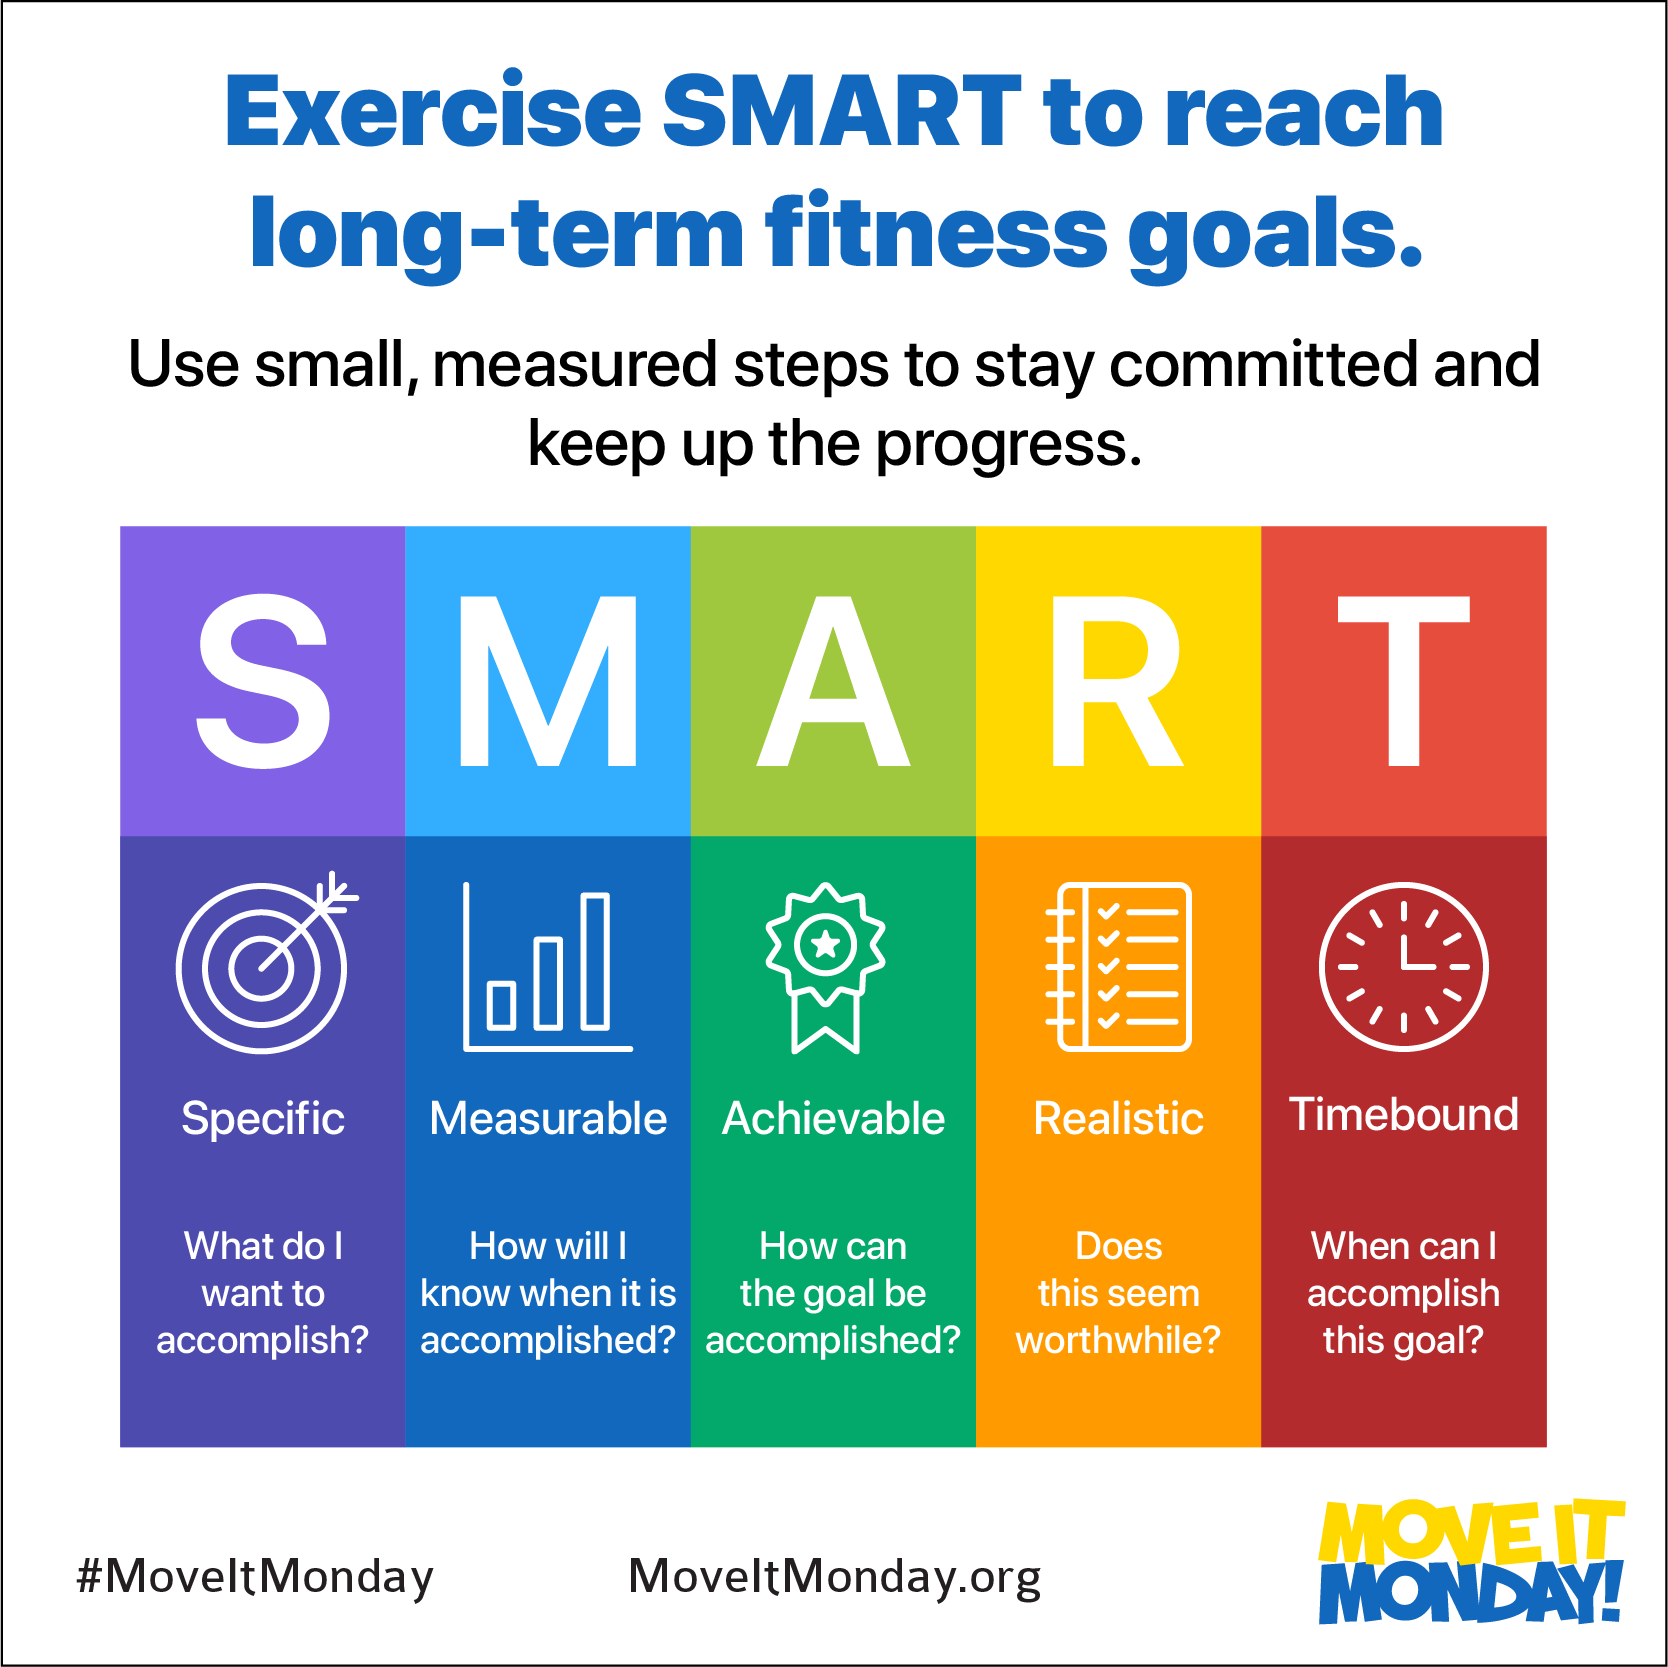 Take the SMART approach to exercising consistently